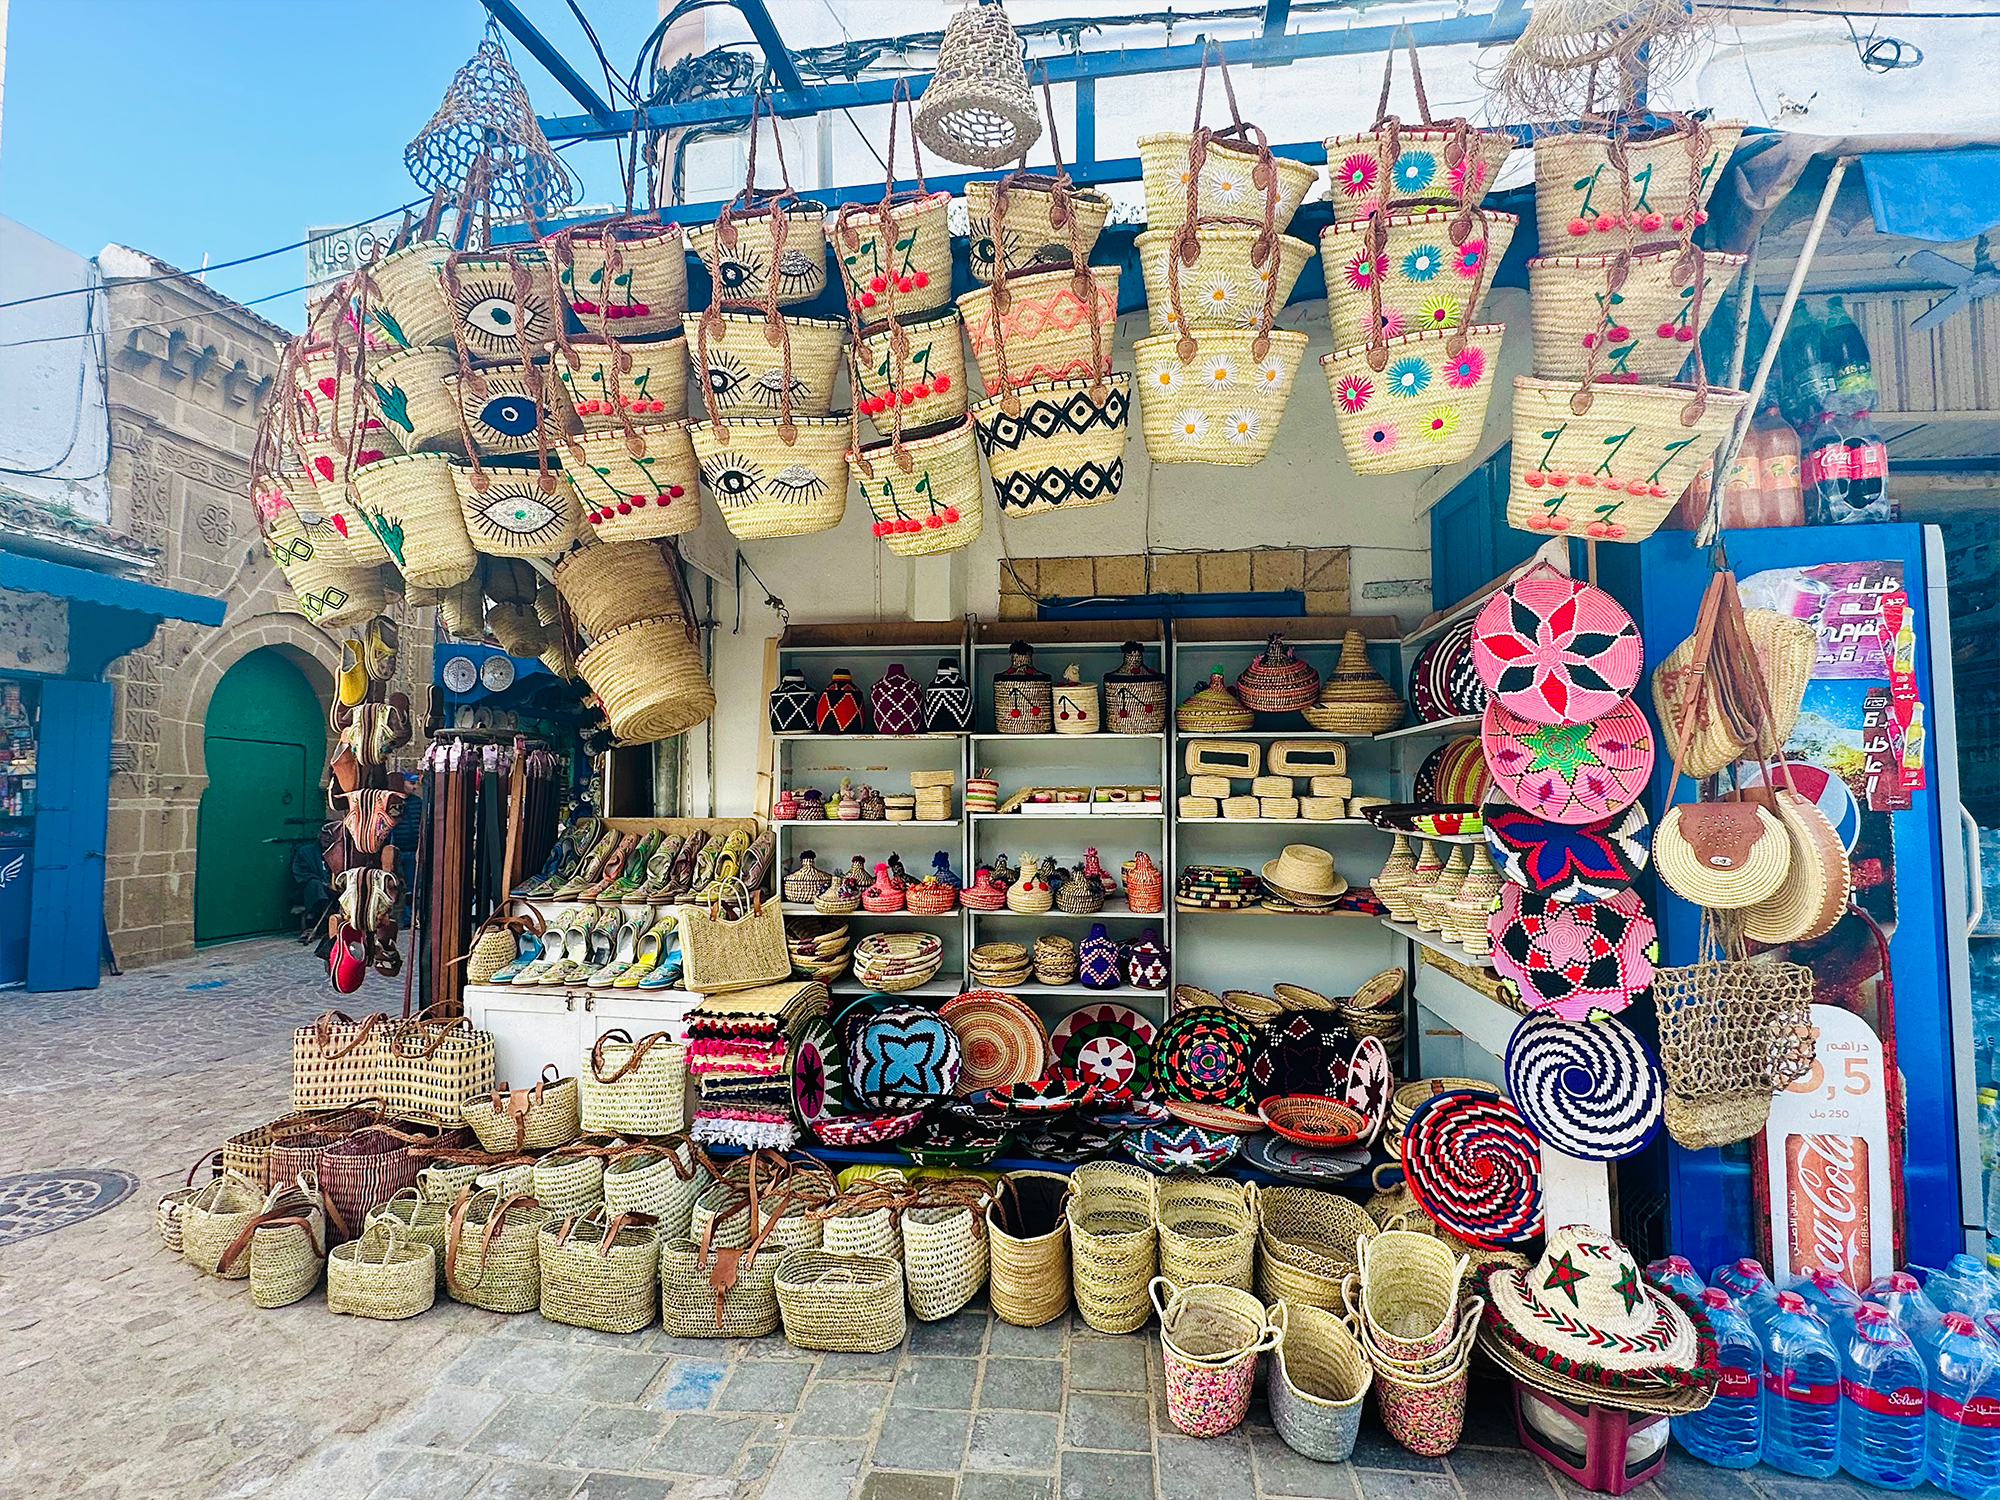 Euphoric Threads Travel Blog - Euphoric Escapades - The Adventures of Griffindor - The Ultimate Travel Guide to Shopping in Morocco. Essaouria shopping guide